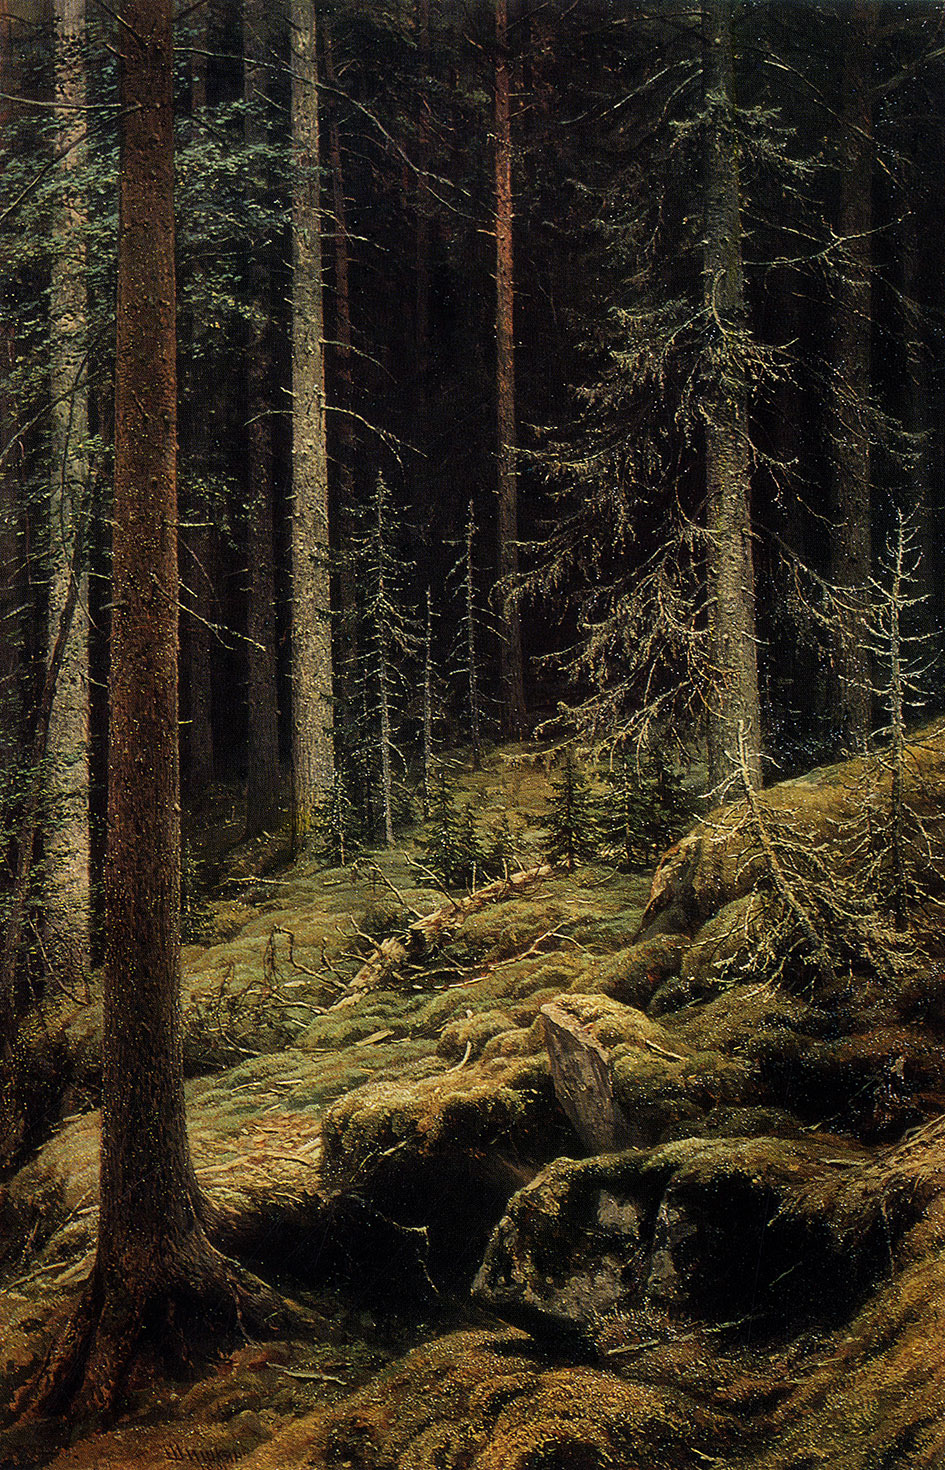 91. The thicket. 1881. Oil on canvas. 142X93 cm. The Tretyakov Gallery, Moscow